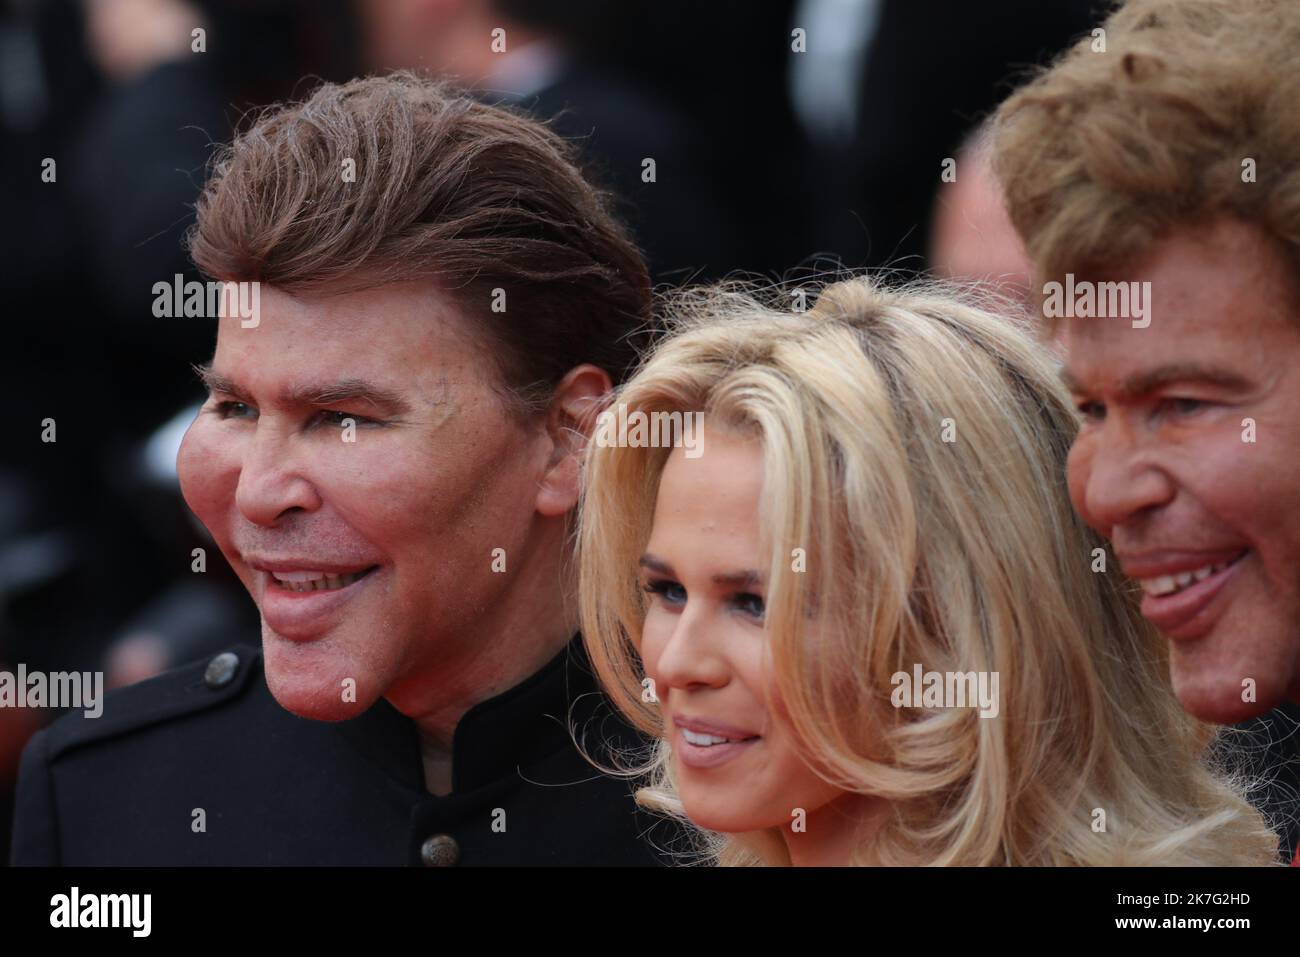 ©Pierre Teyssot/MAXPPP ; FILE PICTURE - Cannes Film Festival 2018 - 71st edition - Day 8 - May 15 in Cannes, on May 15, 2018; Screening of 'Solo: A star Wars Story; Grichka Bogdanoff is died on the 28th of December 201, in Paris at the age of 72, probably from Covid-19. On the red carpet, posing for photographer, Julie Jardon, Grichka Bogdanoff (left) and right his brother Igor Bogdanoff. Â© Pierre Teyssot / Maxppp  Stock Photo